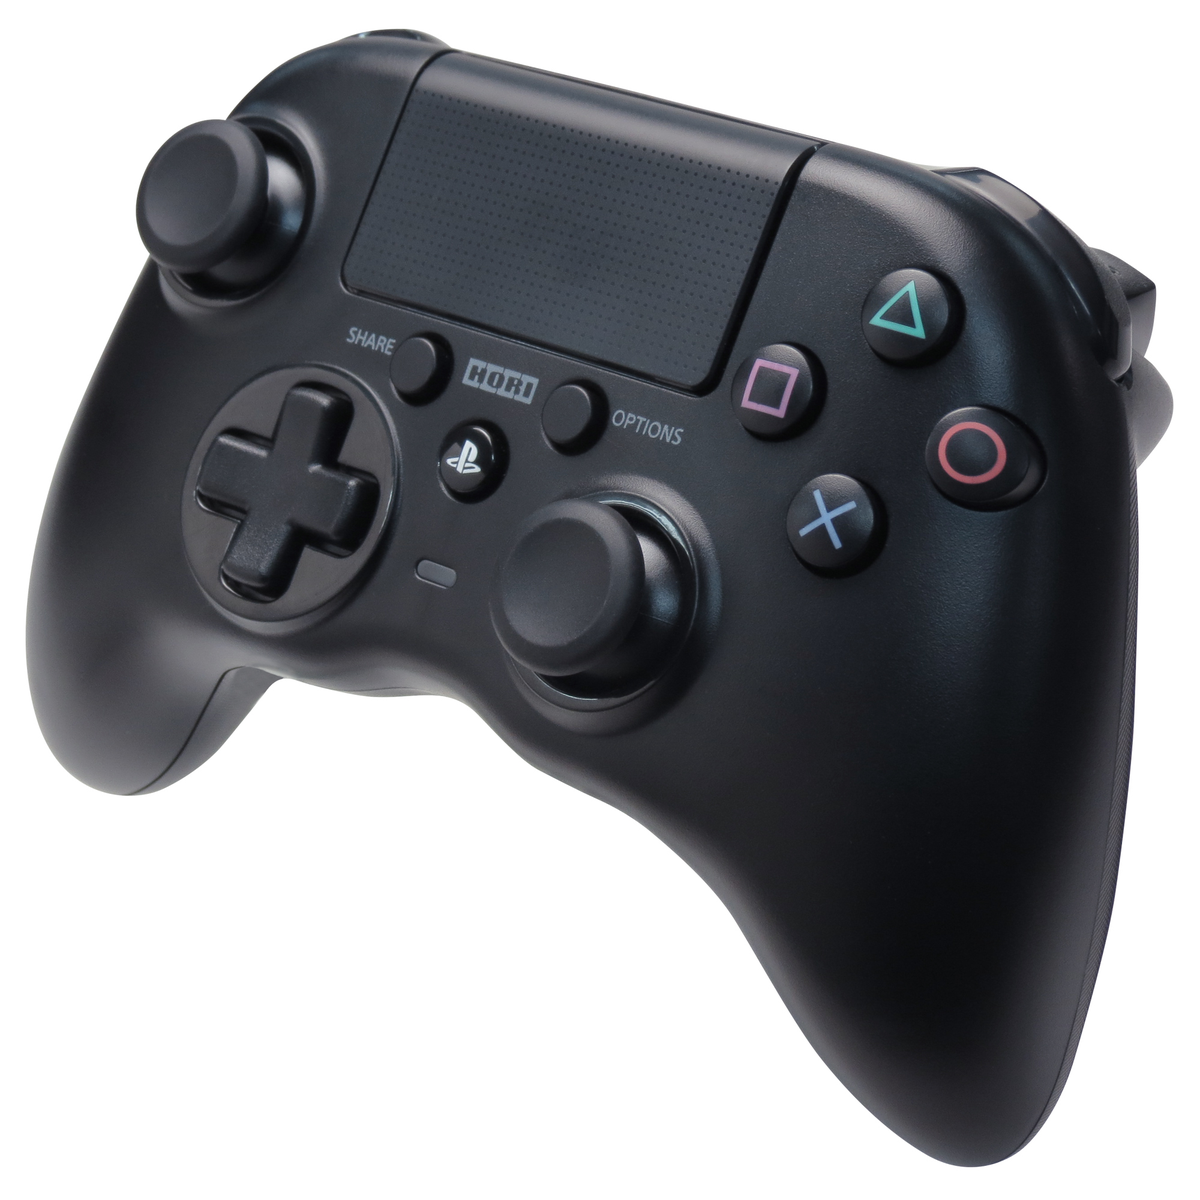 Apt karton auteur If you prefer Xbox Controllers but own a PS4, Hori's Onyx Wireless pad is  perfect for you | VG247